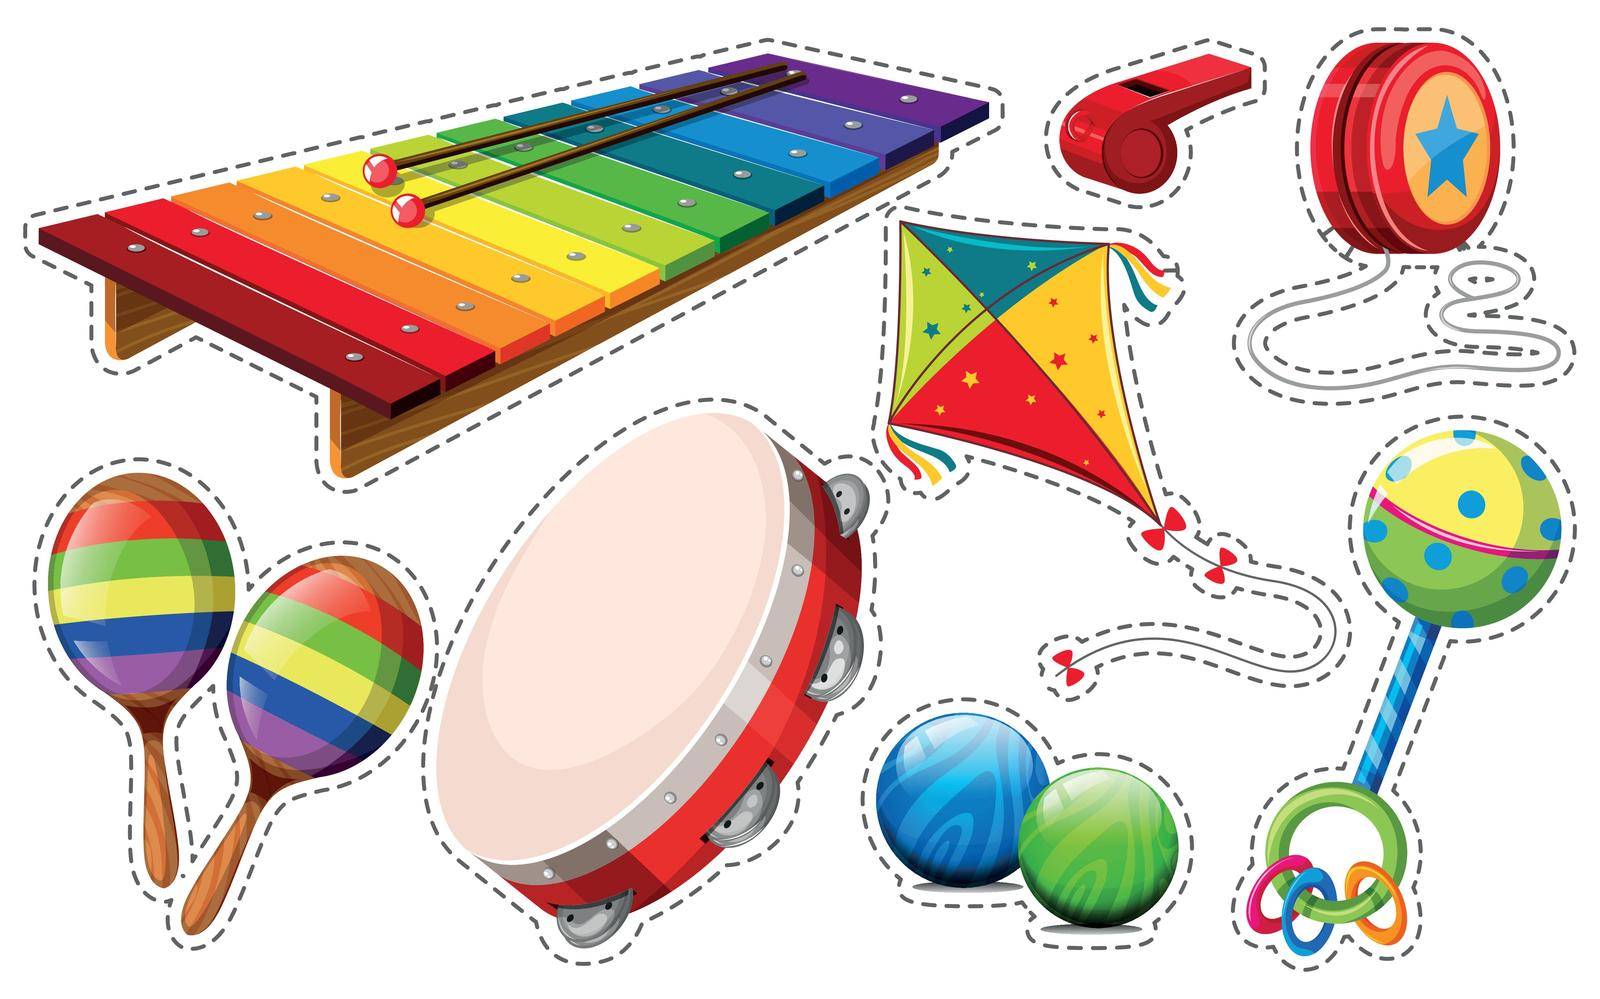 Sticker set of musical instrument and toys illustration